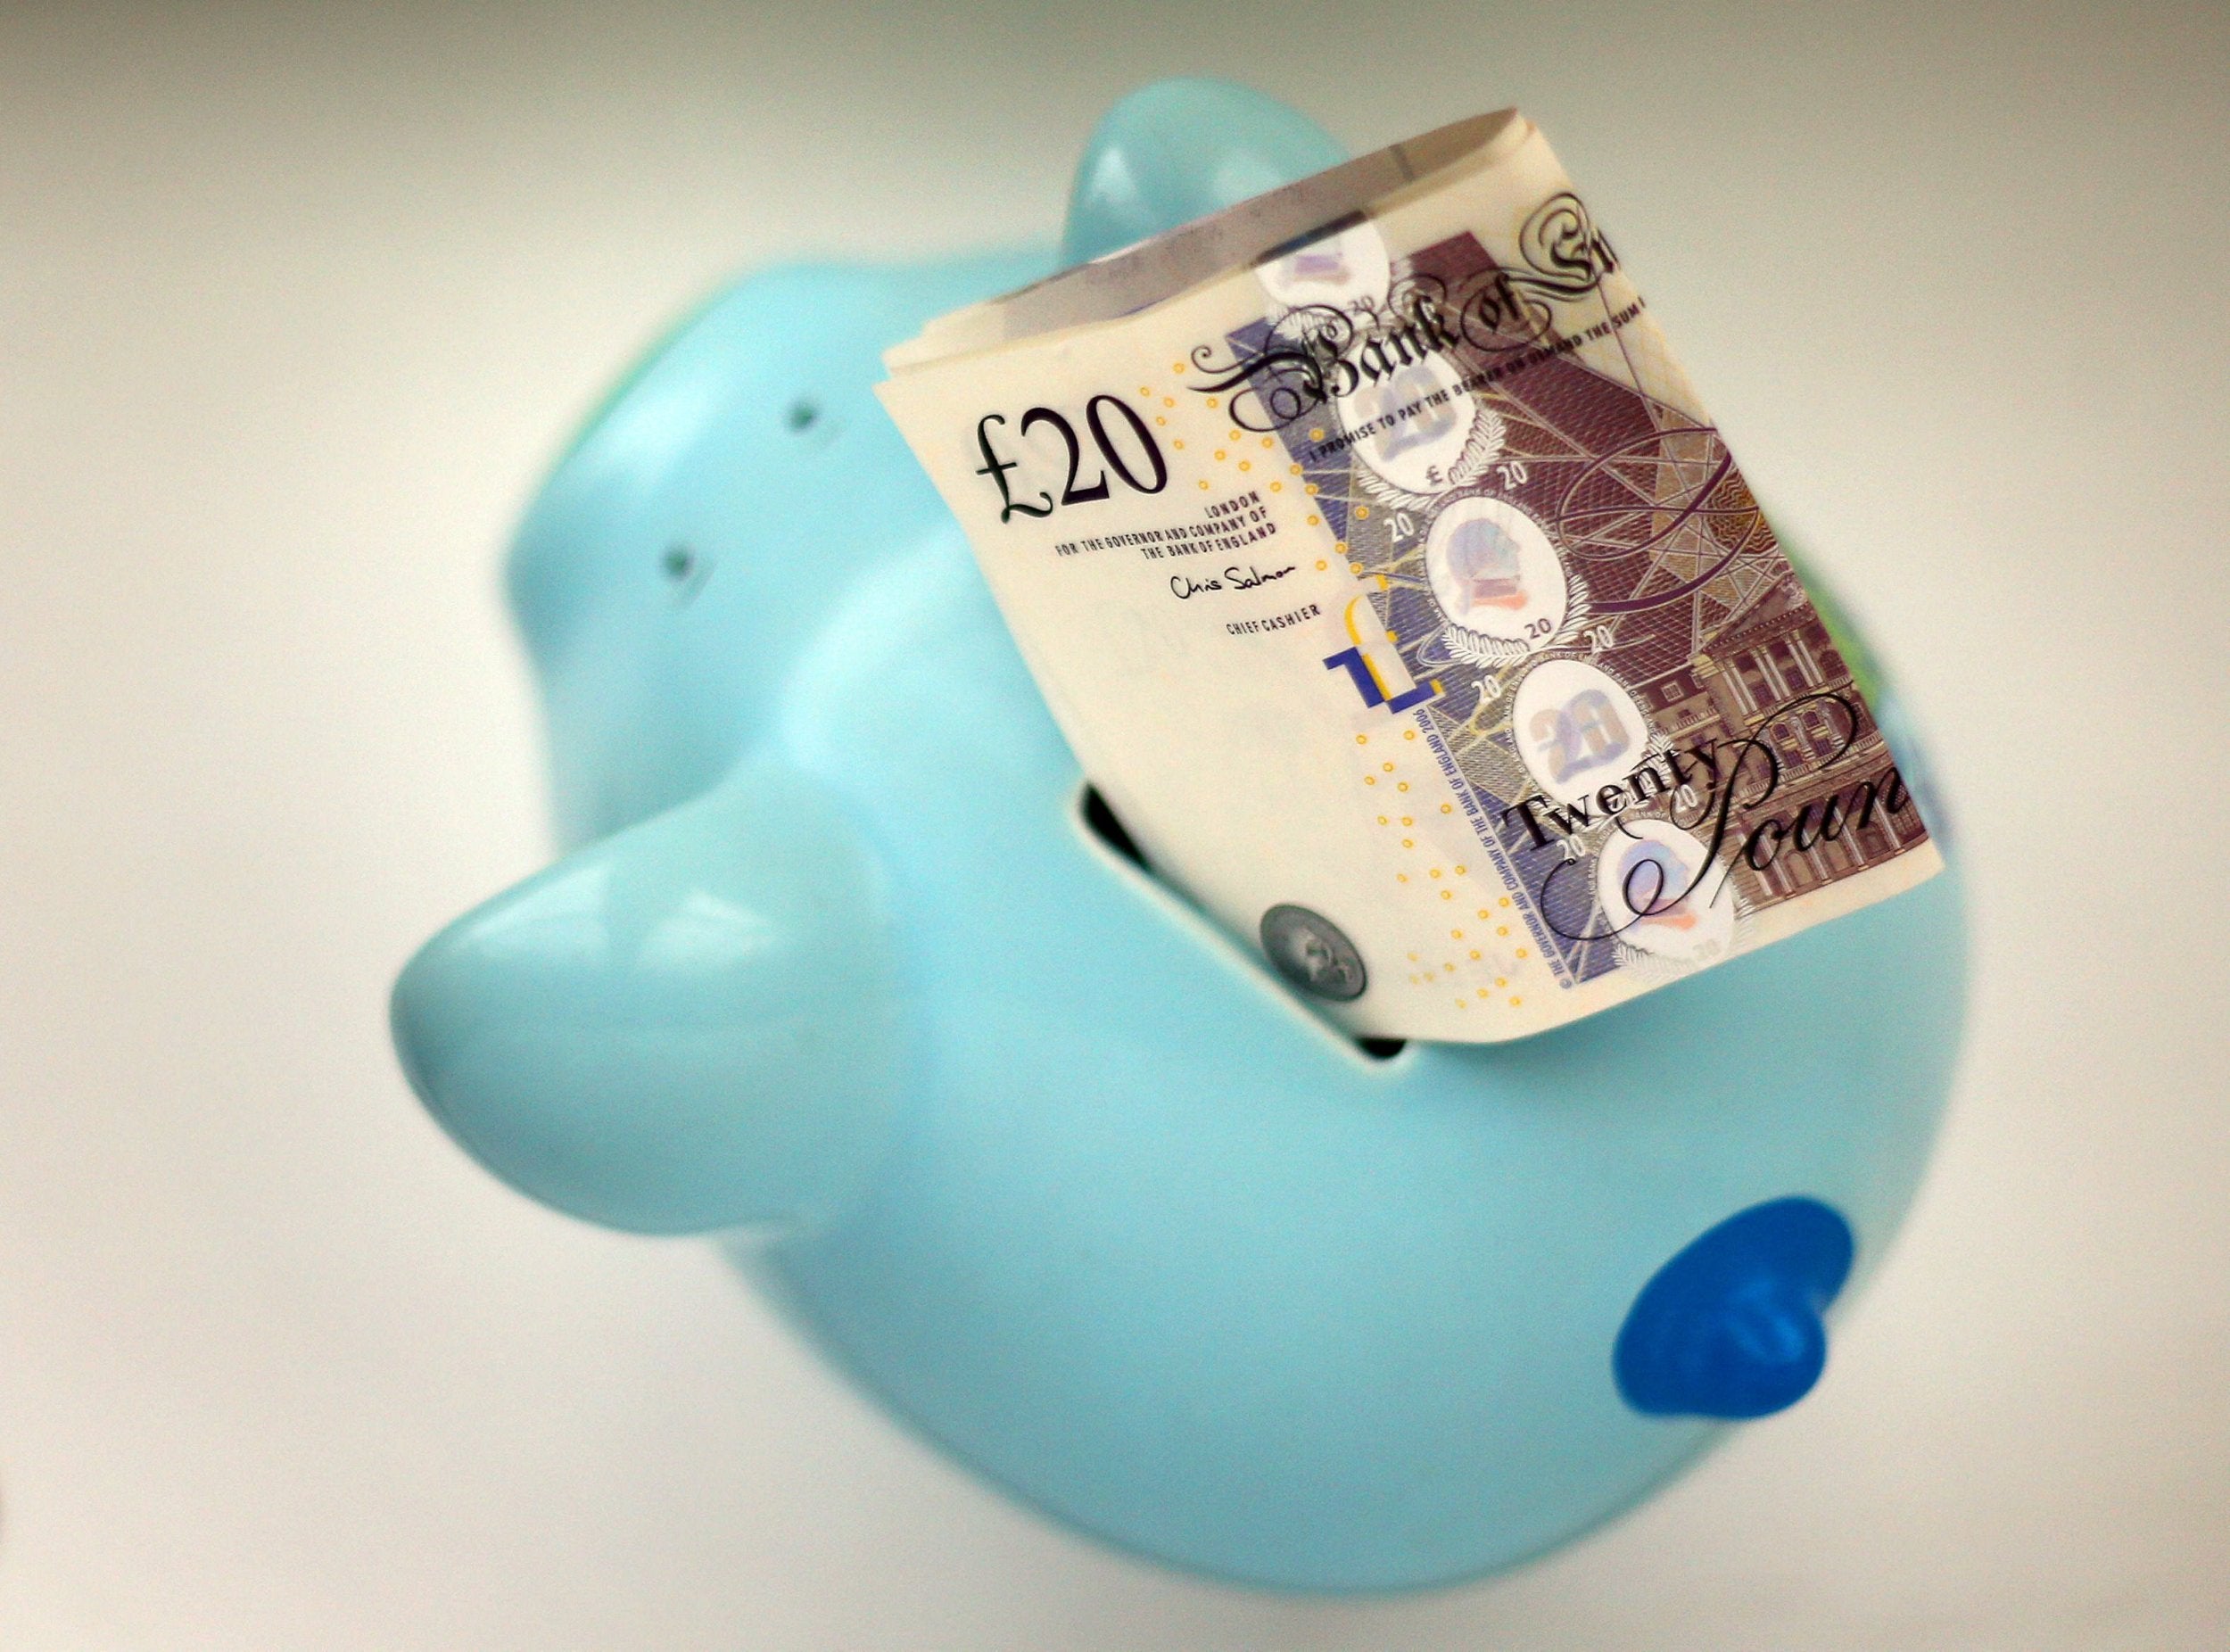 Changes in the personal tax allowance offer a chance to pocket extra cash